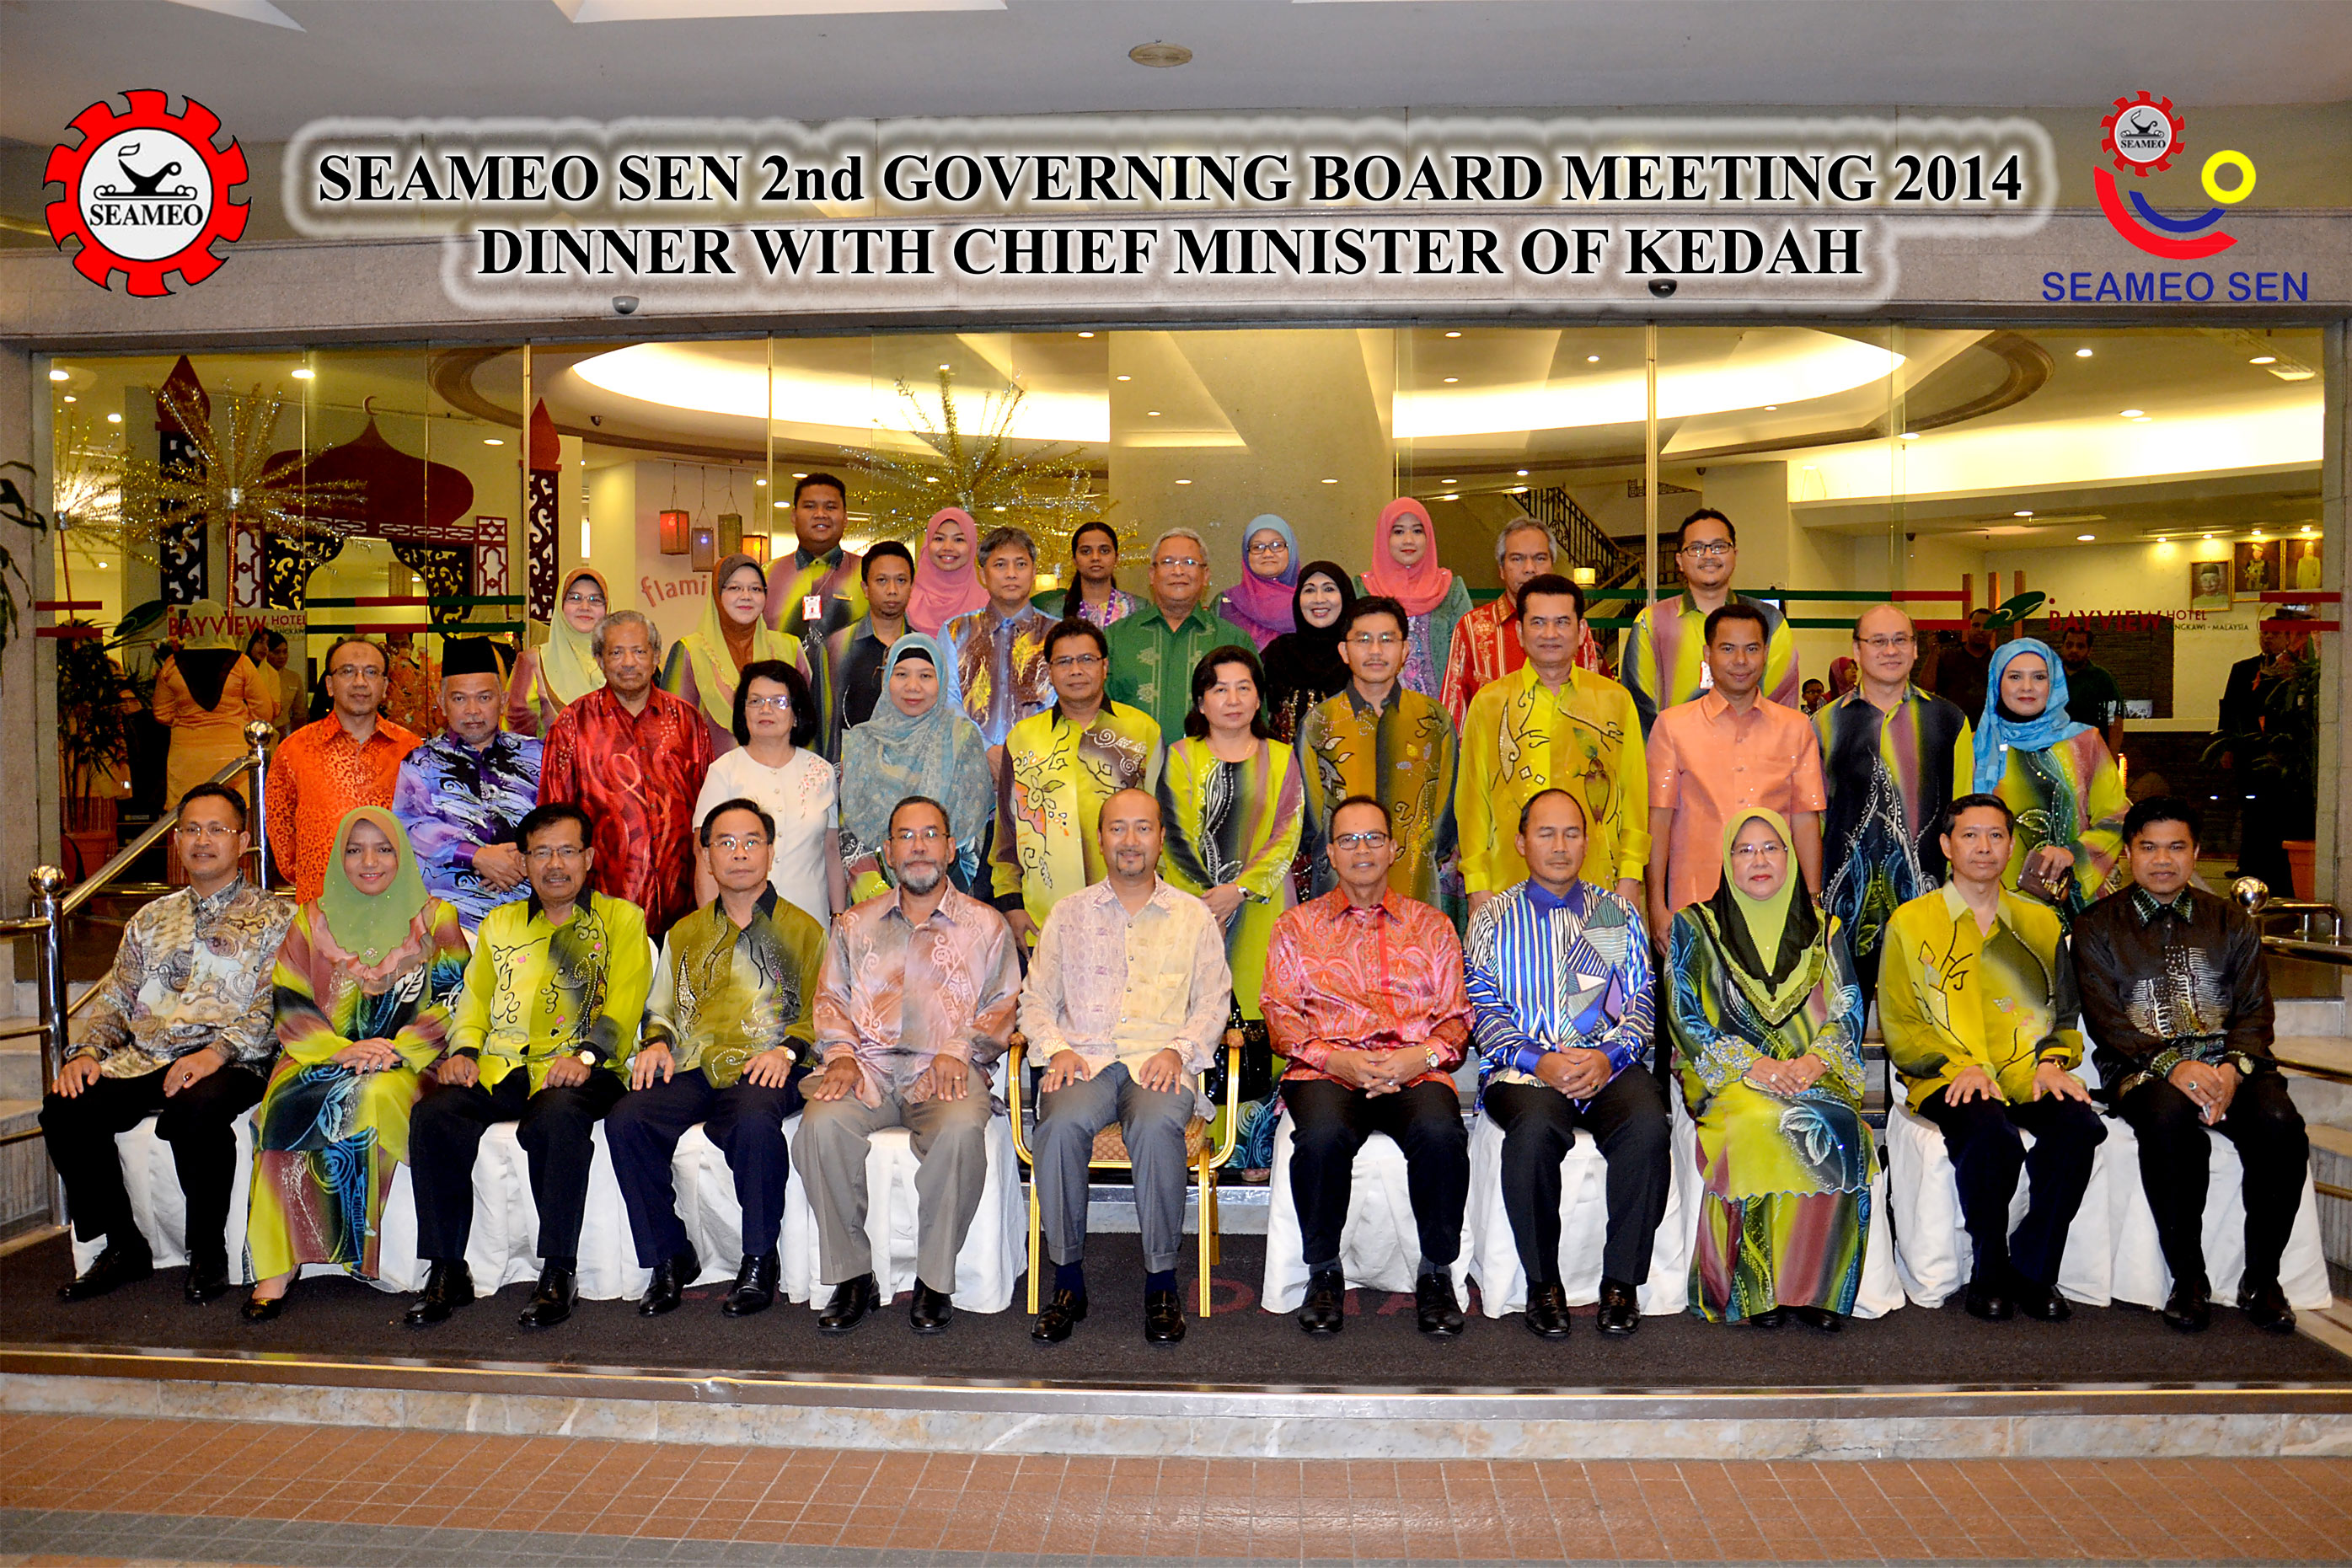 SEAMEO SEN 2nd Governing Board Member Dinner with the Chief Minister of Kedah